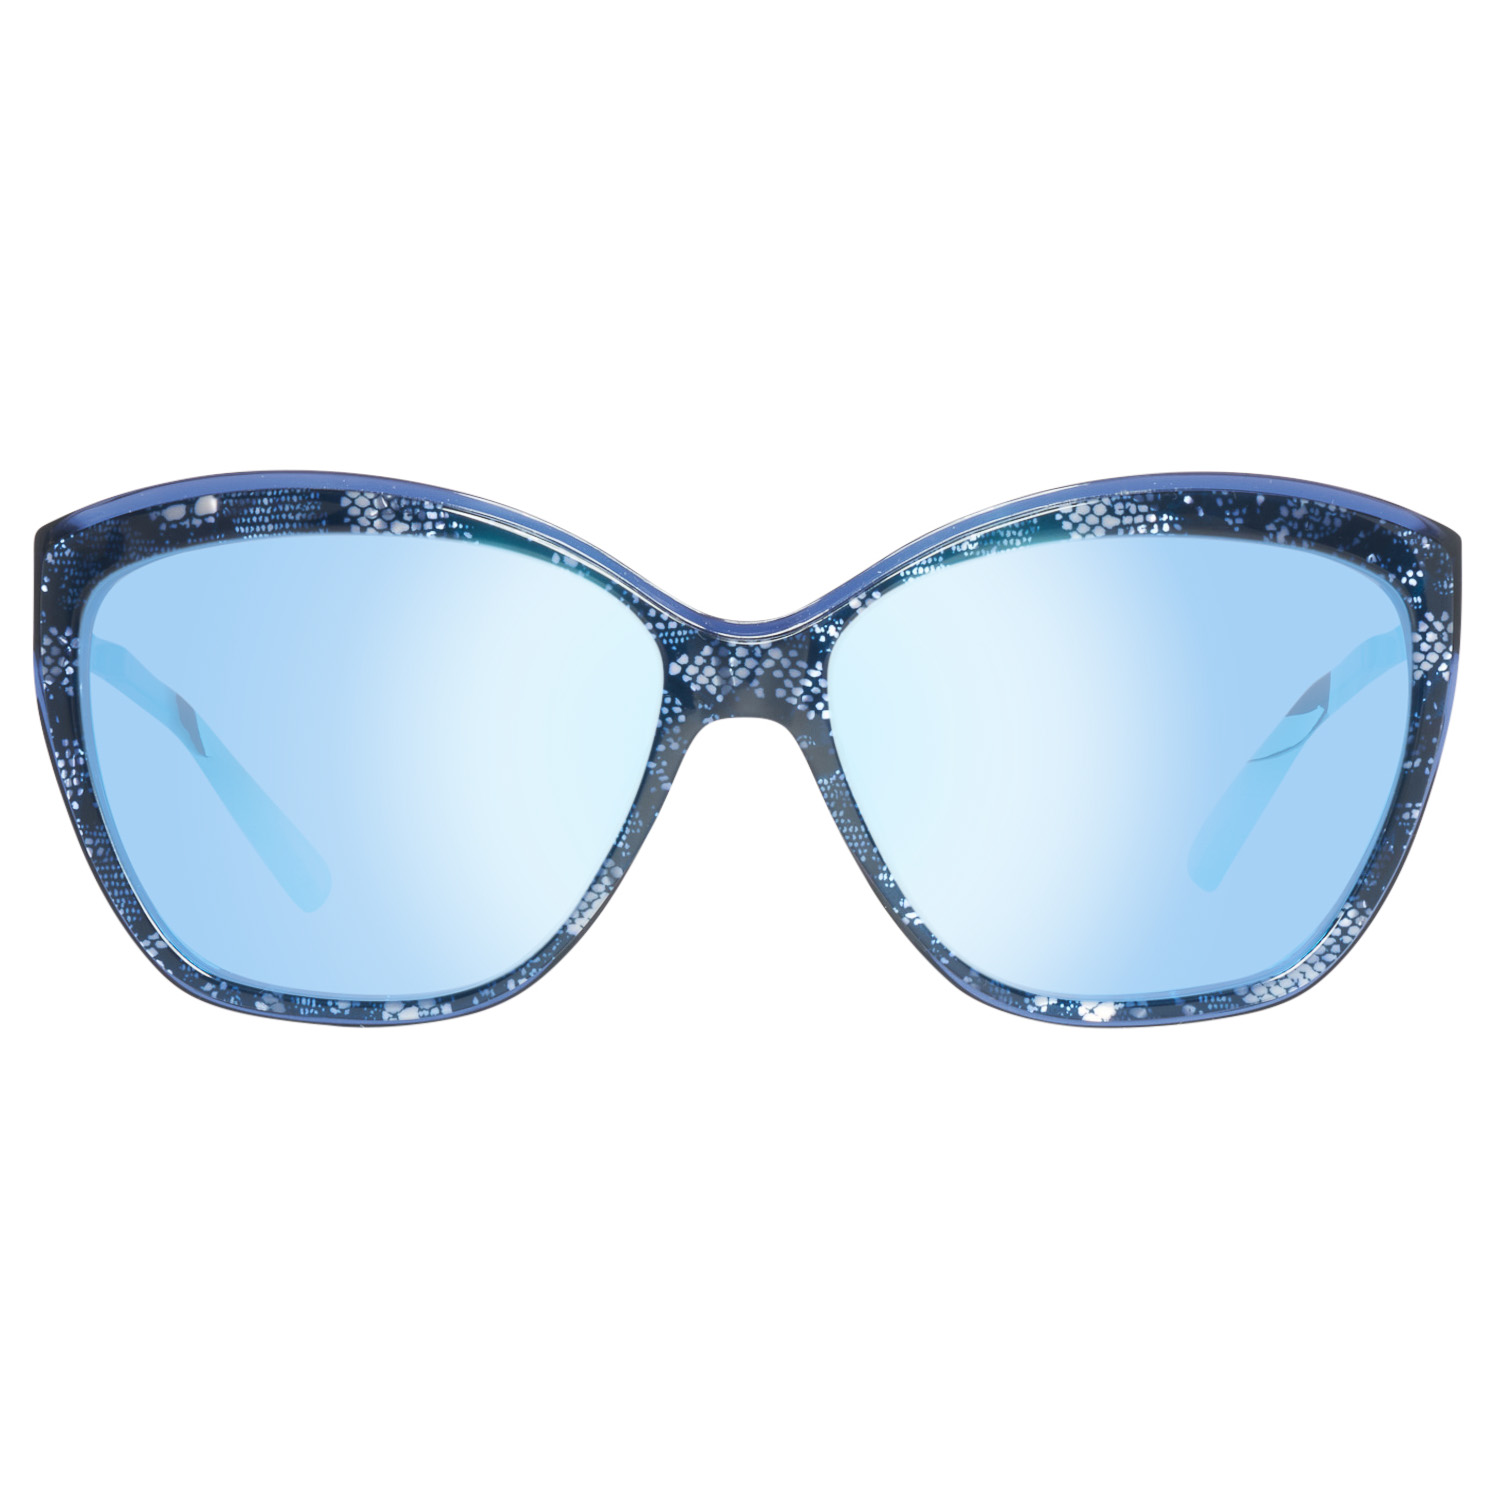 Guess By Marciano Sunglasses GM0738 92X 59 Blue